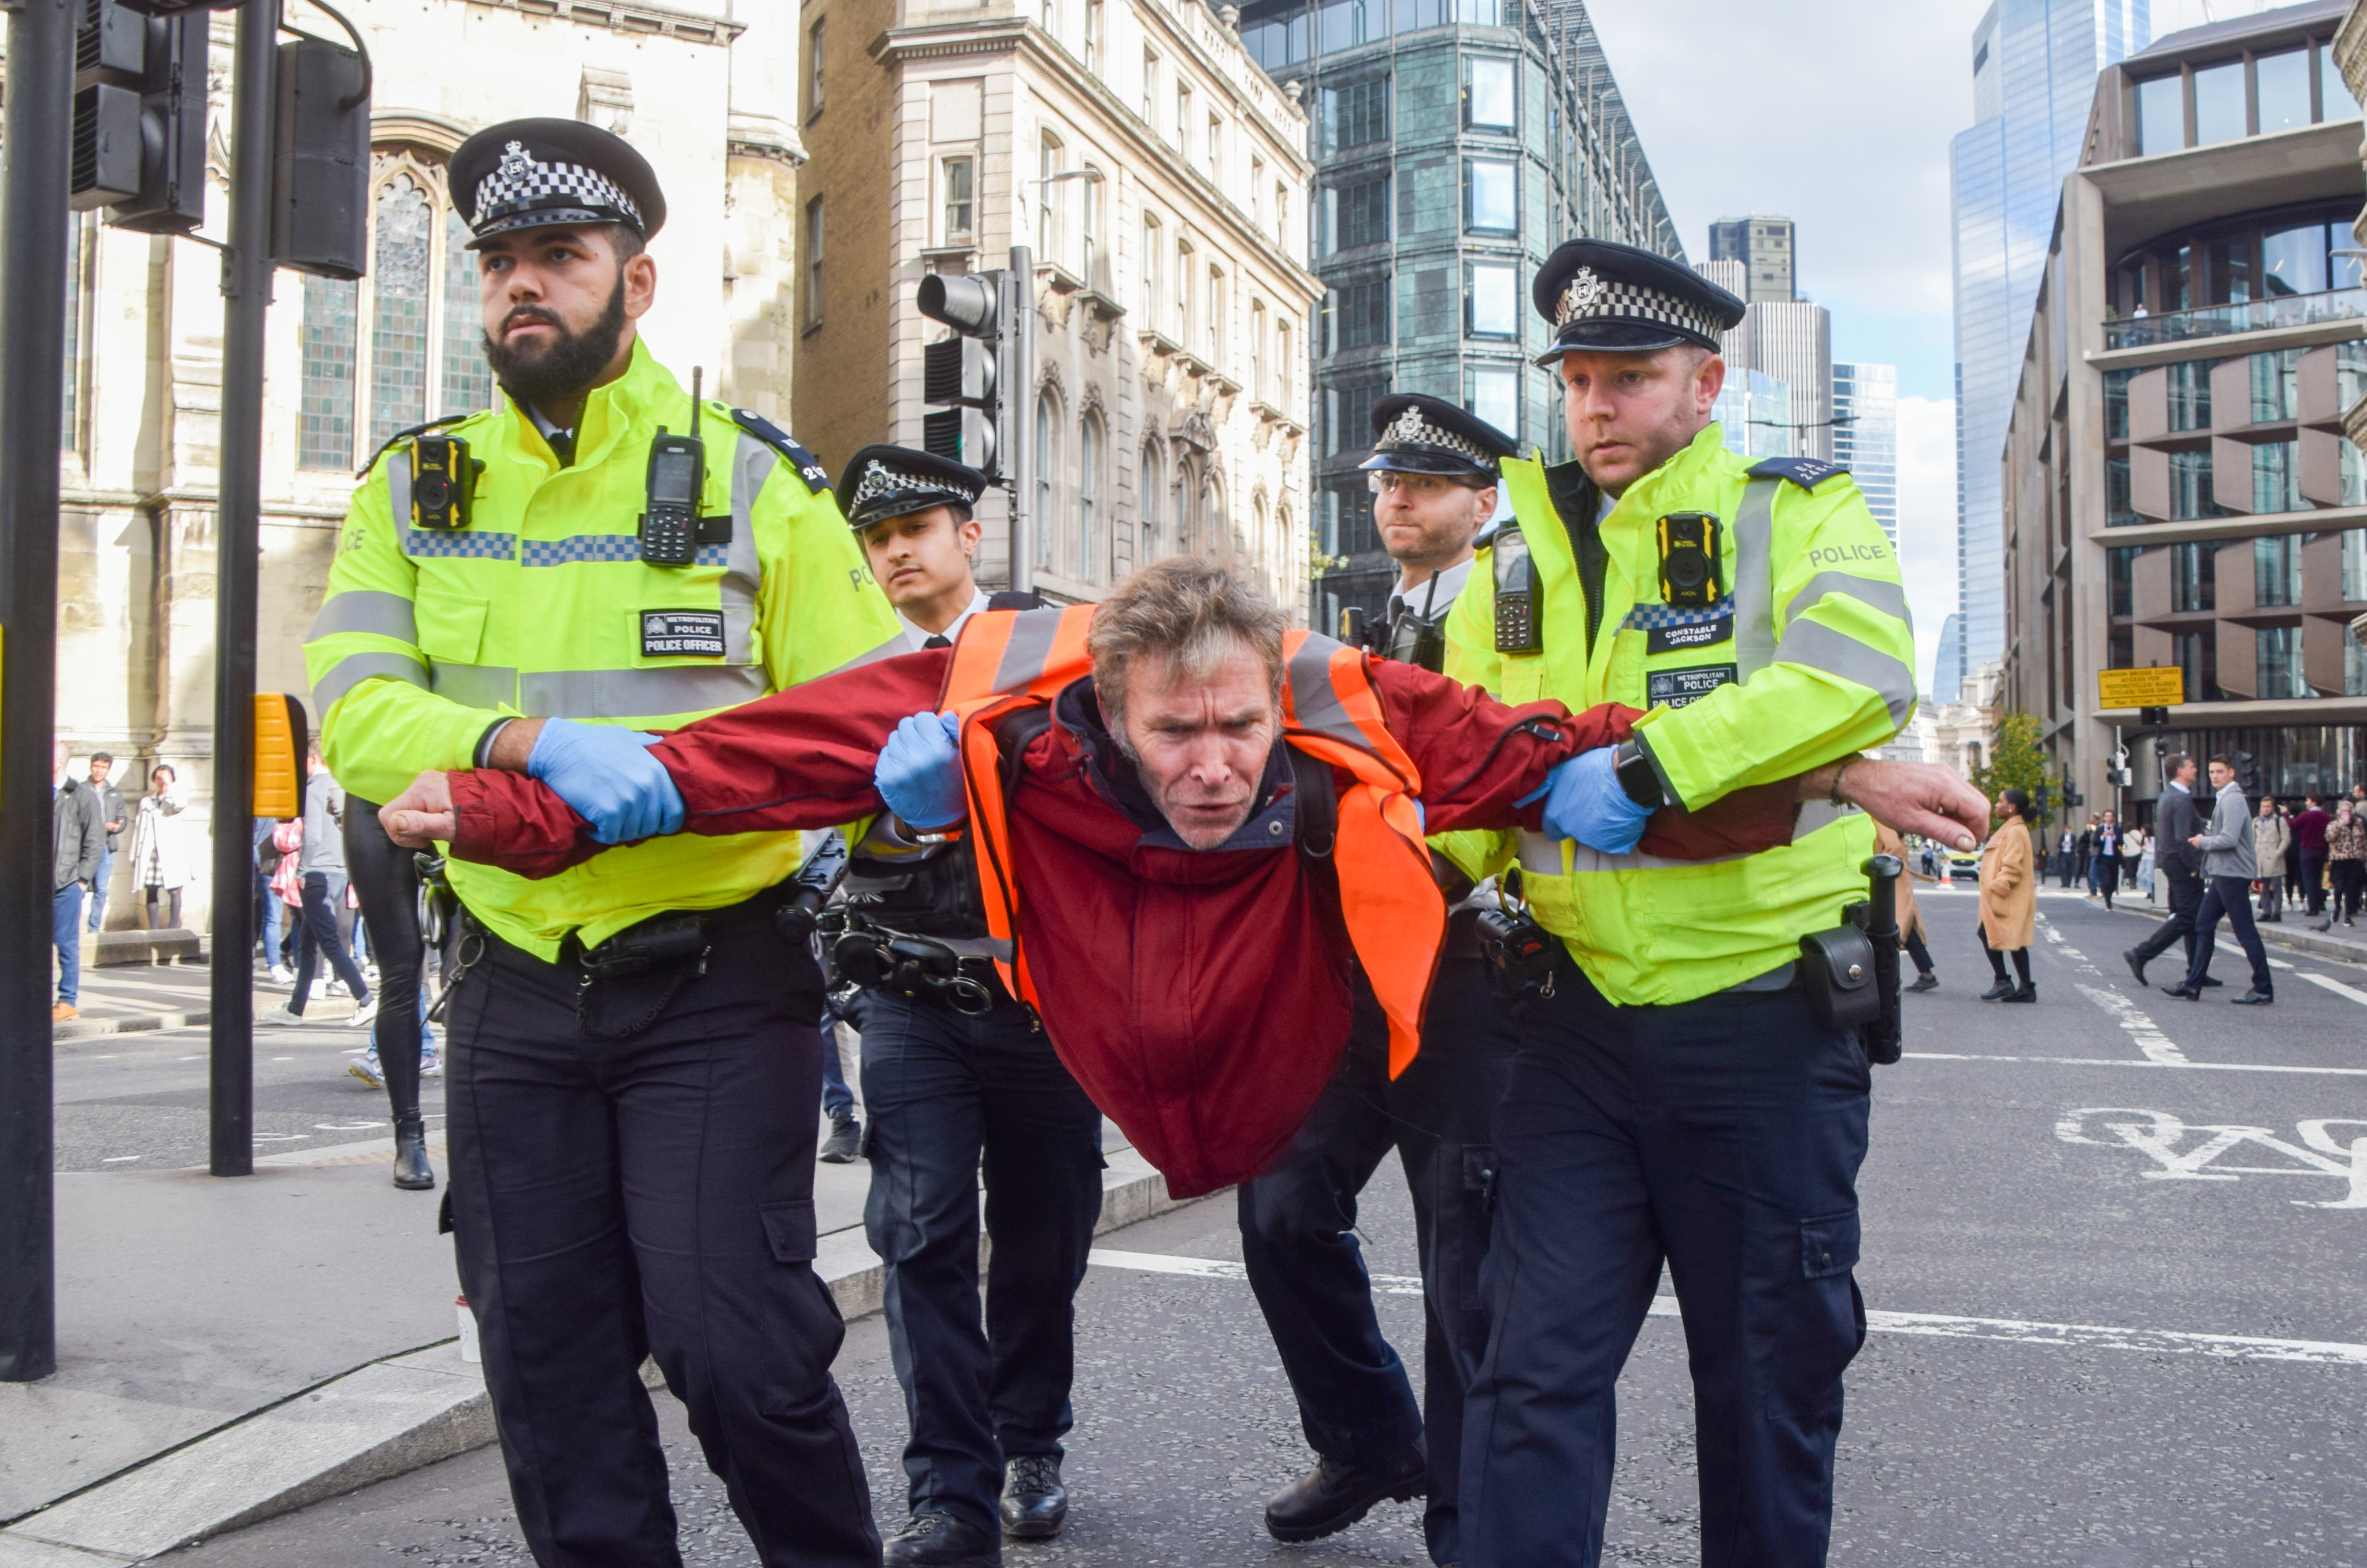 Police arrest a protester during a protest in October by Just Stop Oil activists in London. Photo: dpa